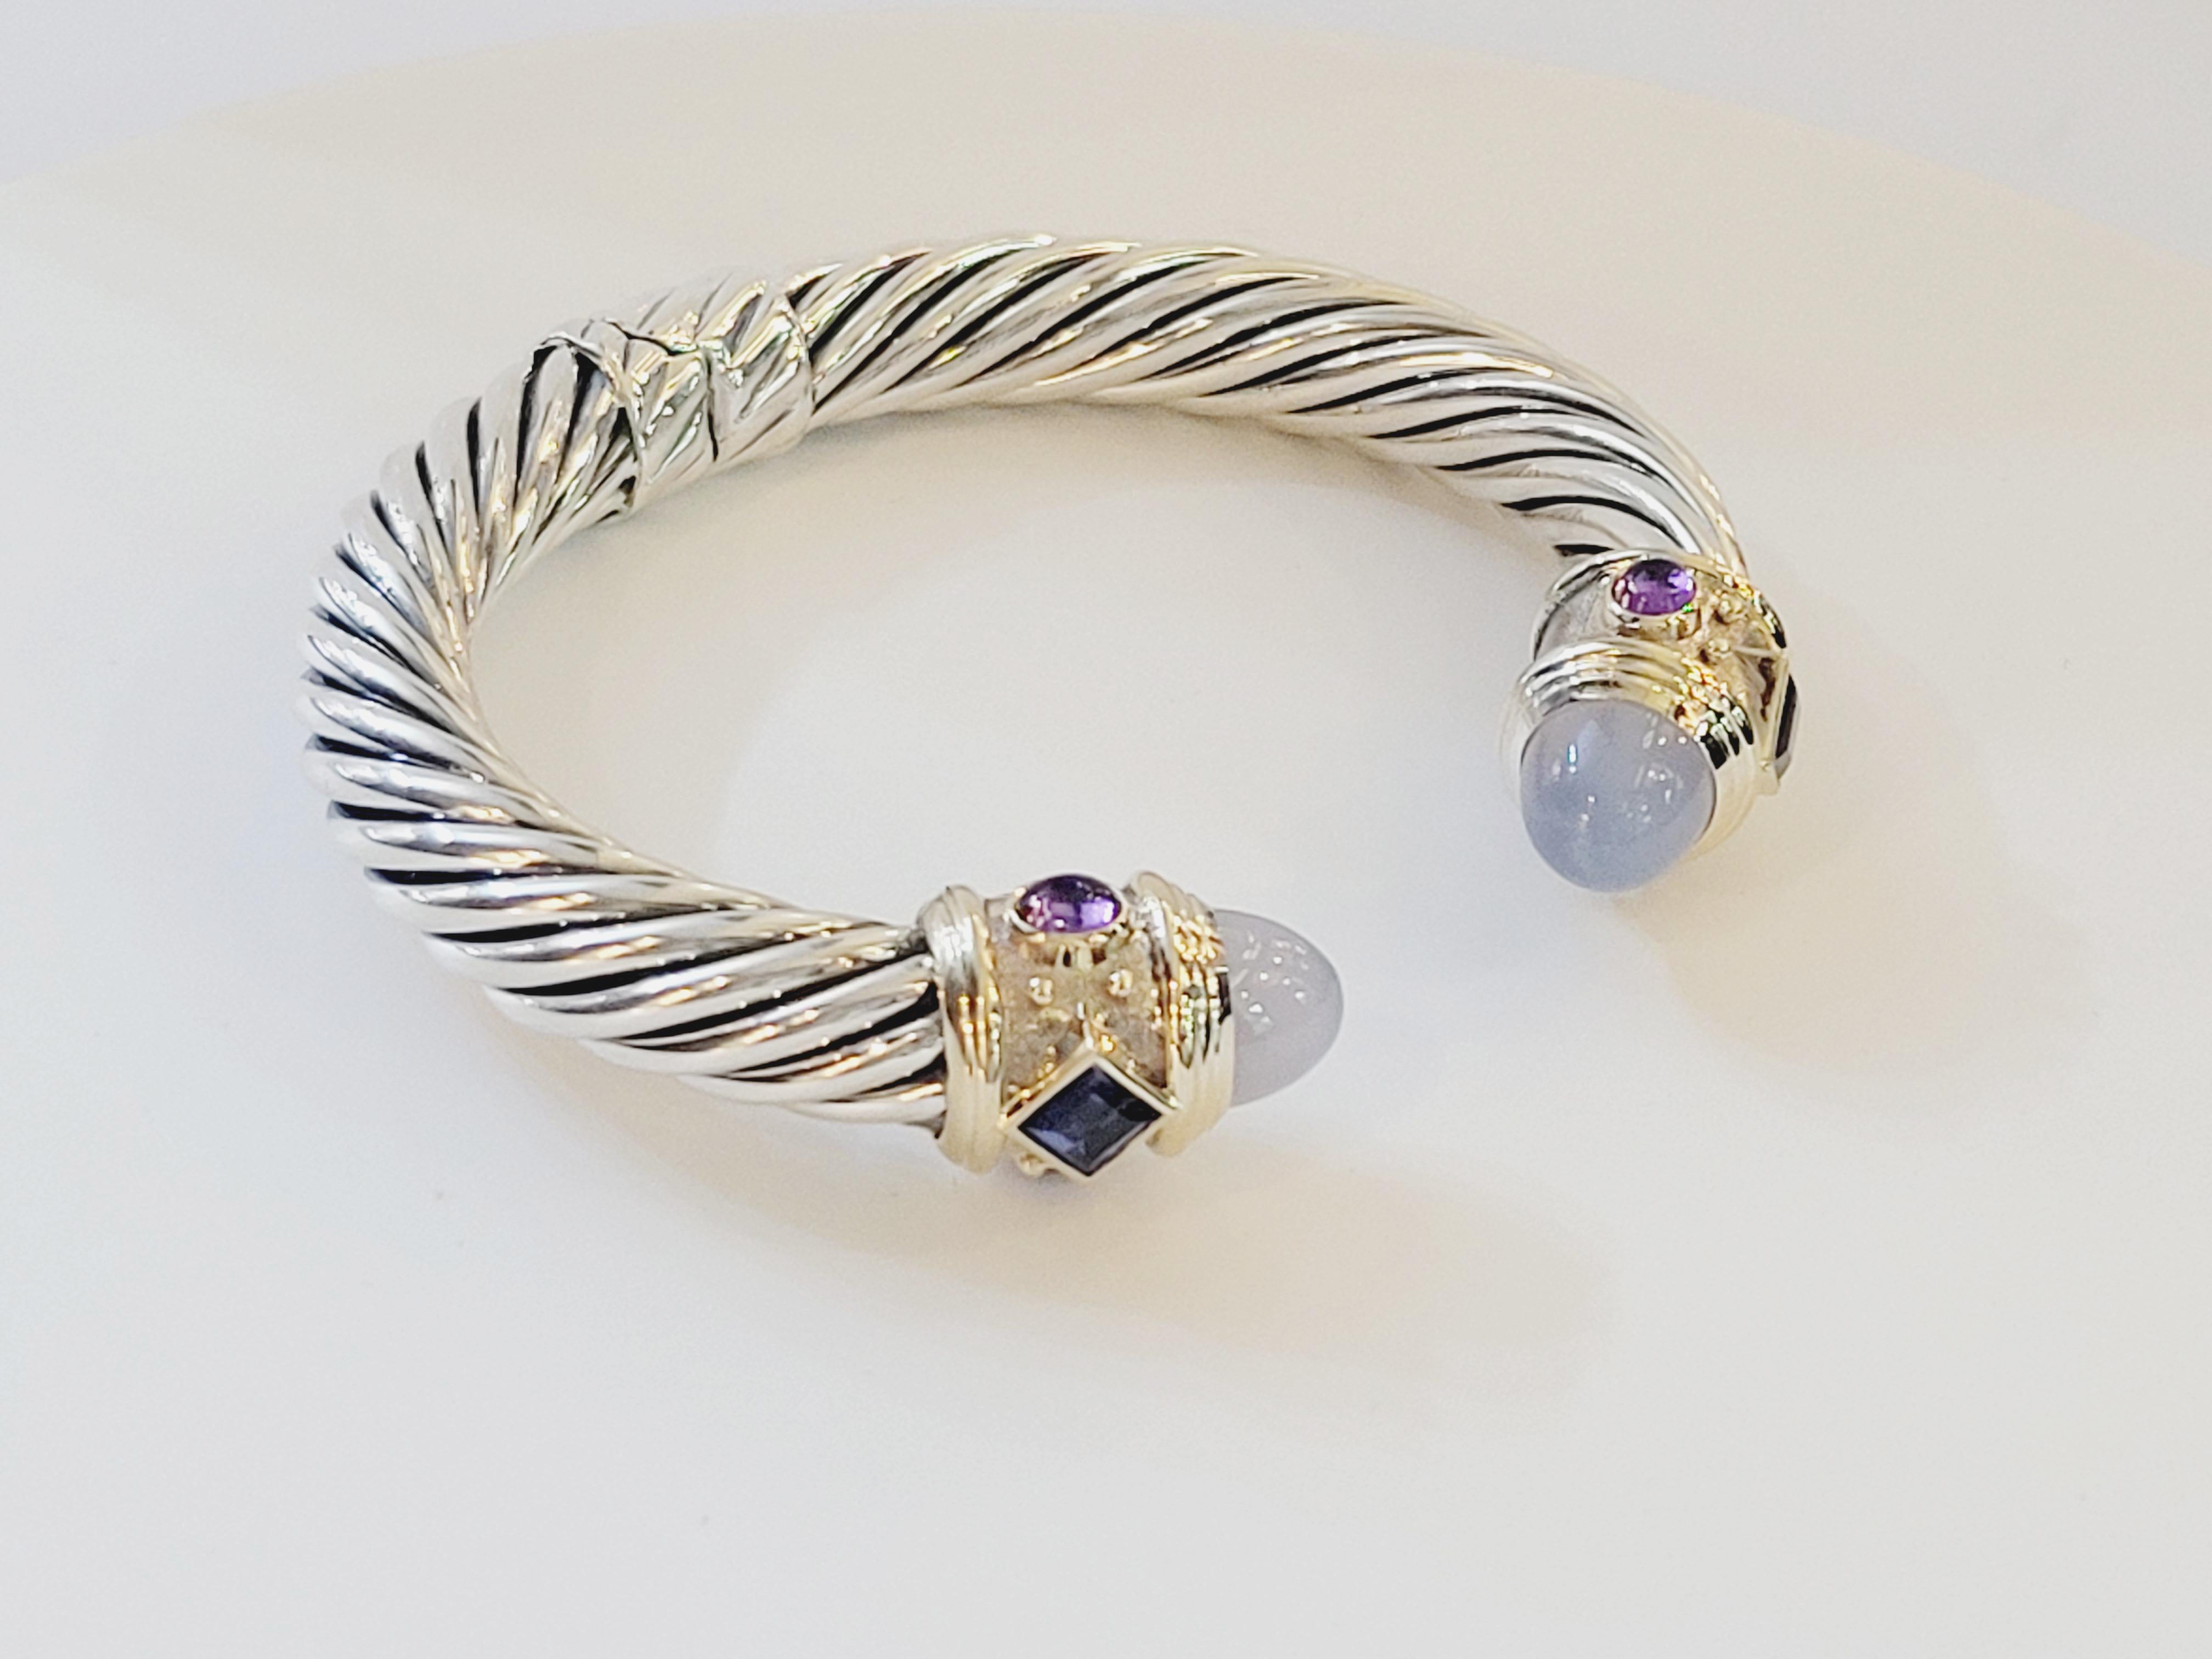 Brand David Yurman
Mint condition 
Type bracelet
Style cable
Bracelet 10mm
Sterling silver and 14-karat yellow gold
Main stone chalcedony
Comes with David Yurman original pouch